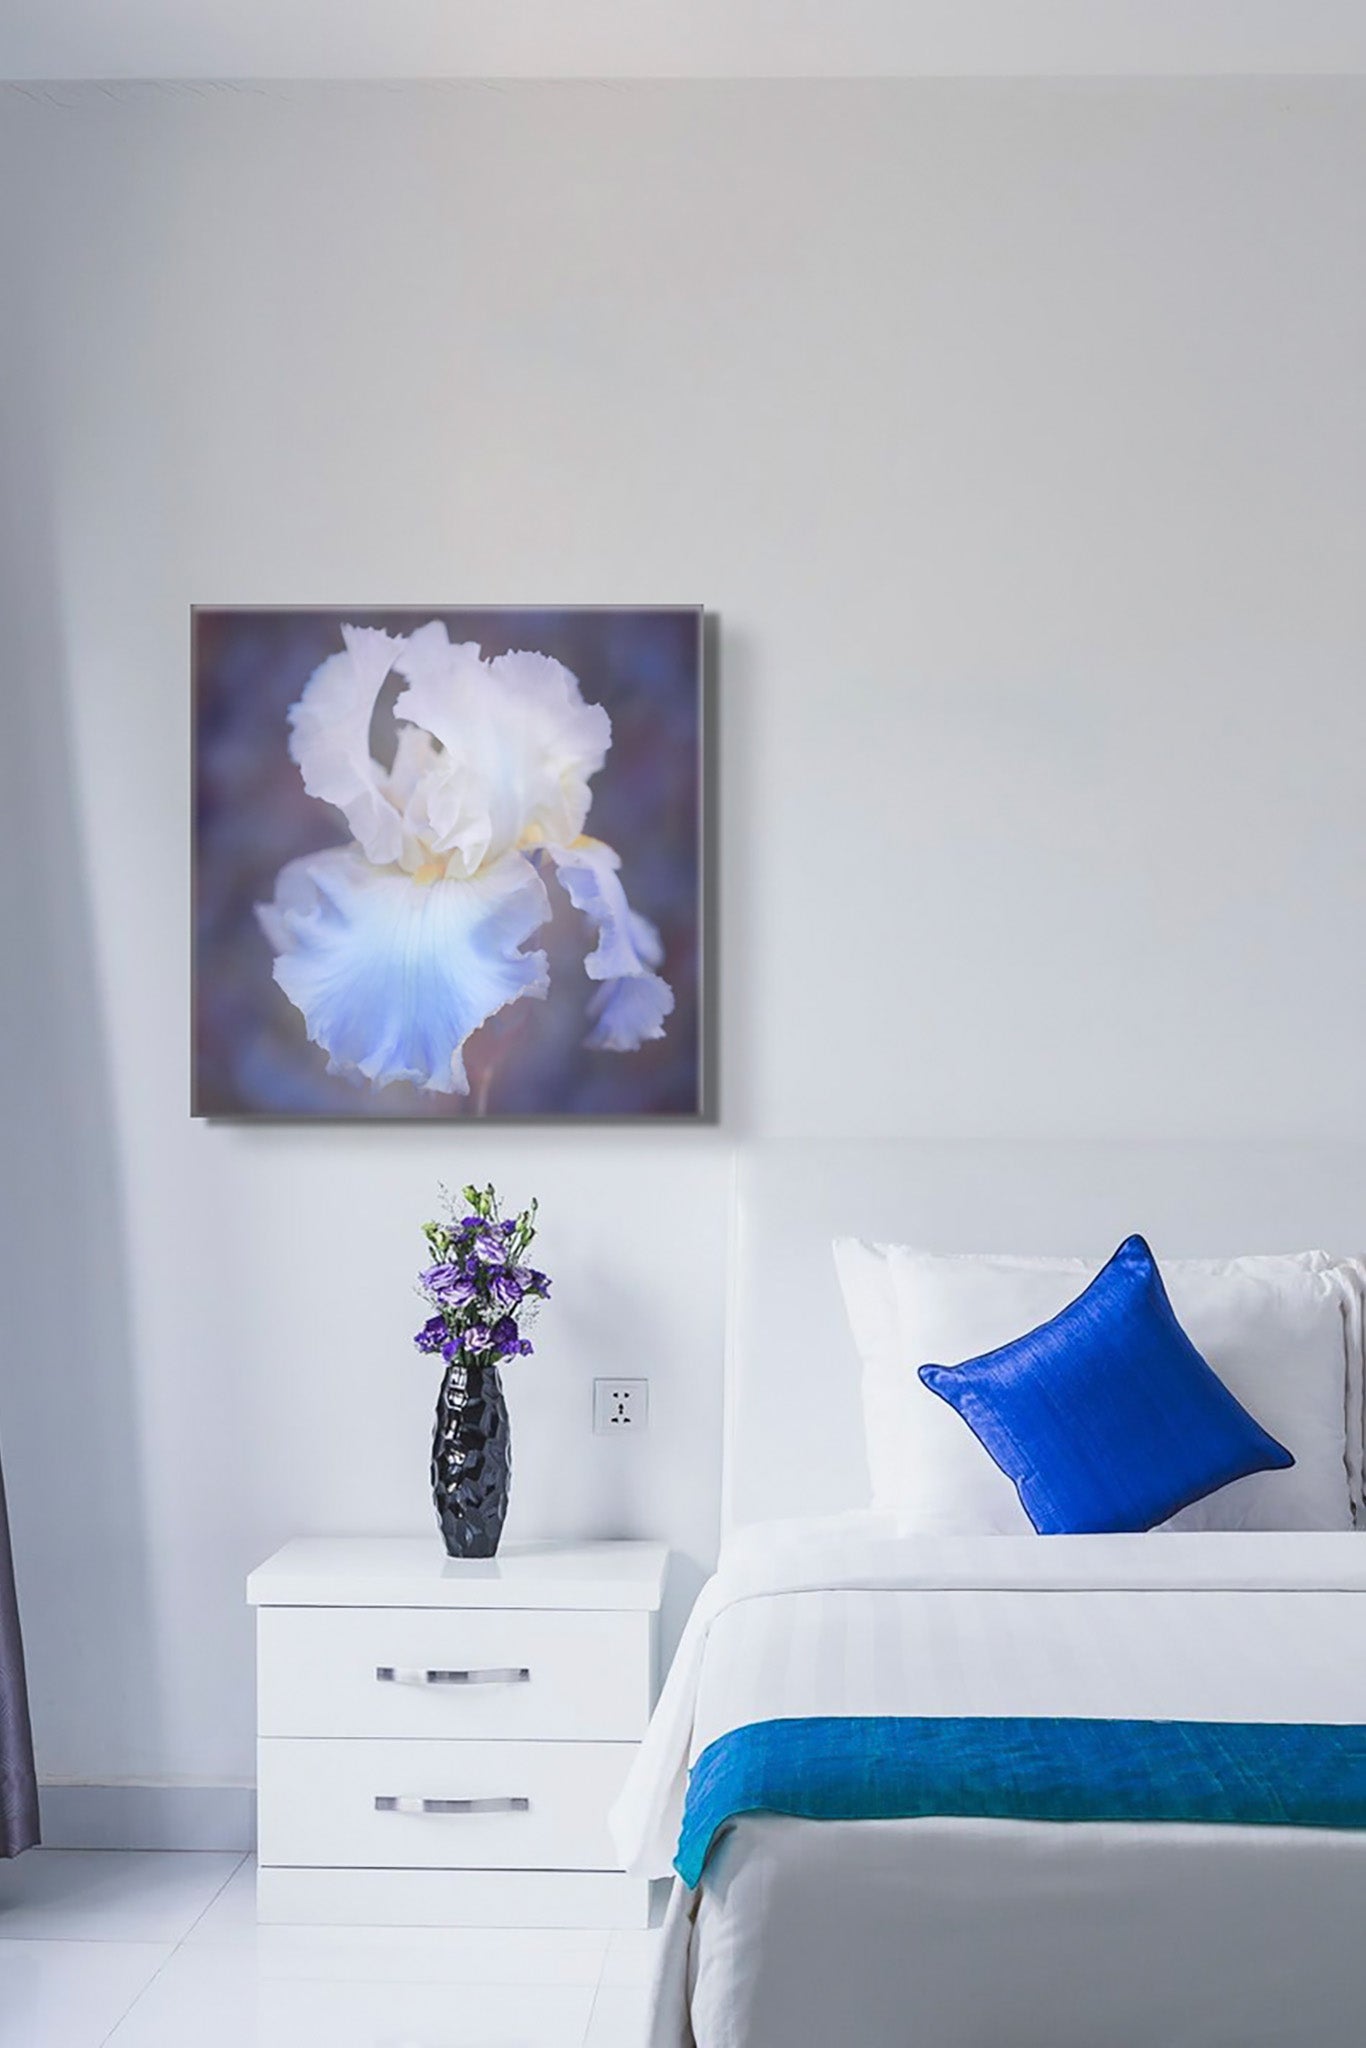 Picture hanging on the wall of the bedroom. The bed is made, and there is a blue pillow. The picture is a blue and white dahlia photograph by Cameron Dreaux. 